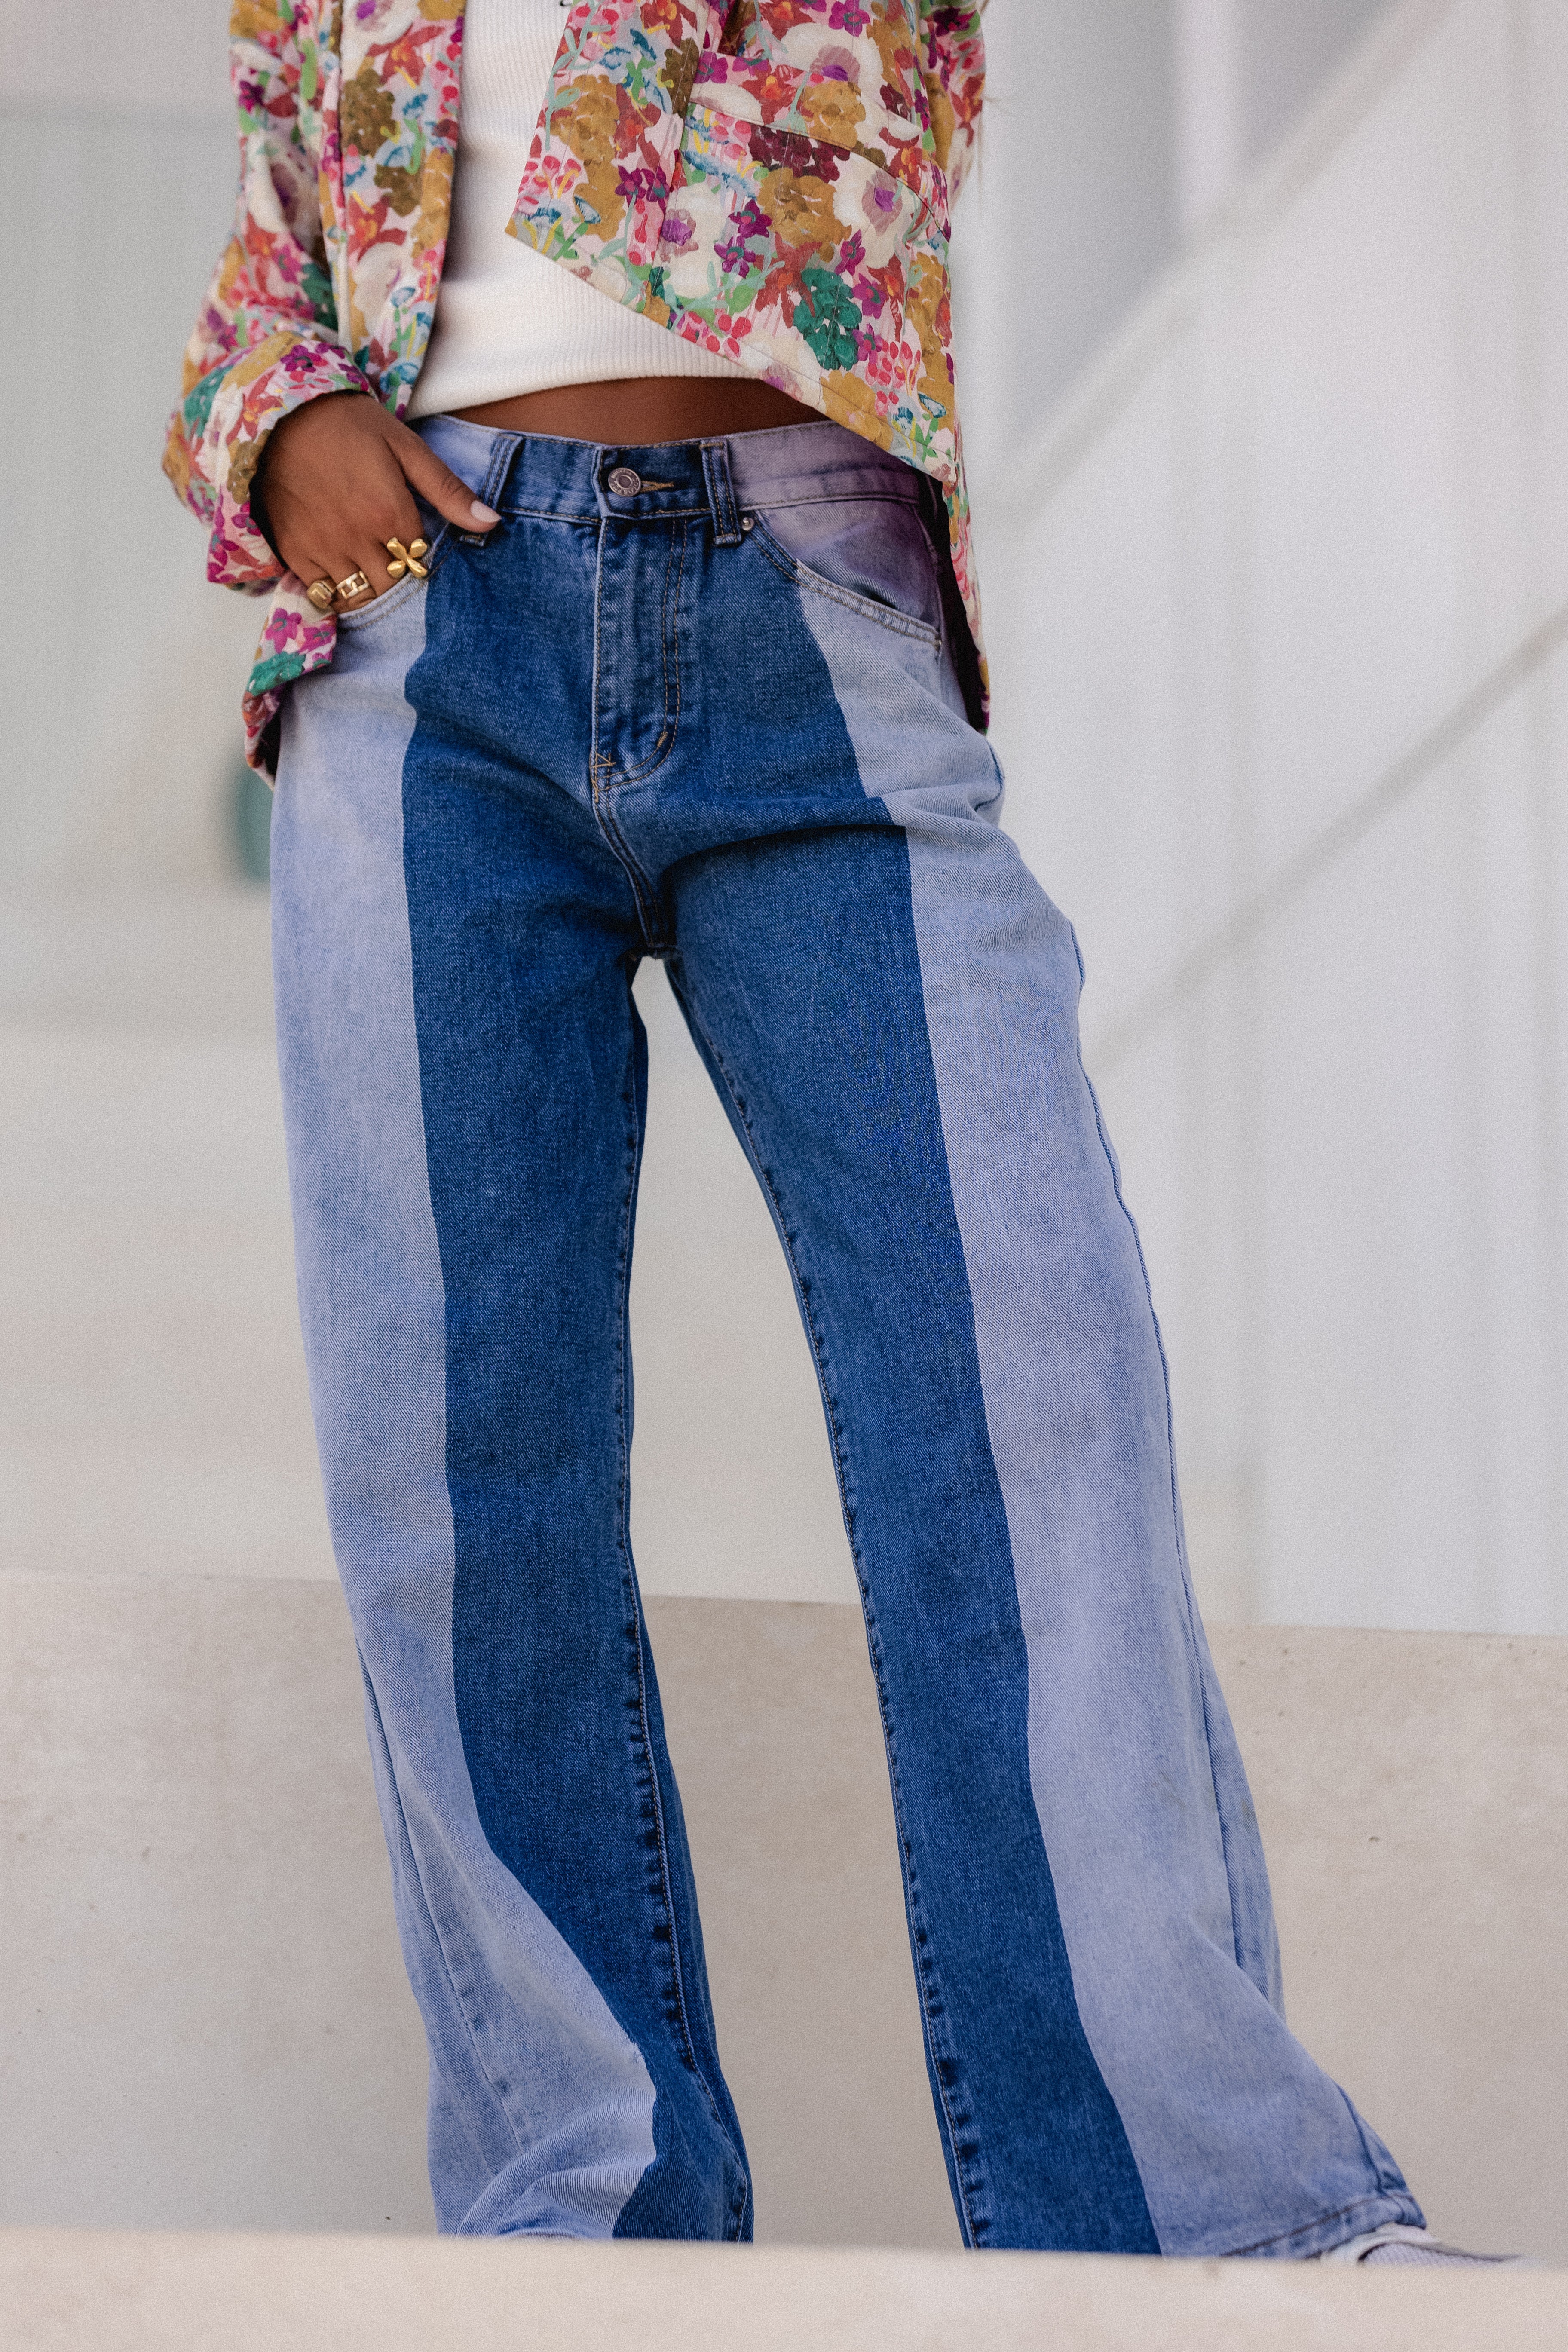 TWO- TONES JEANS